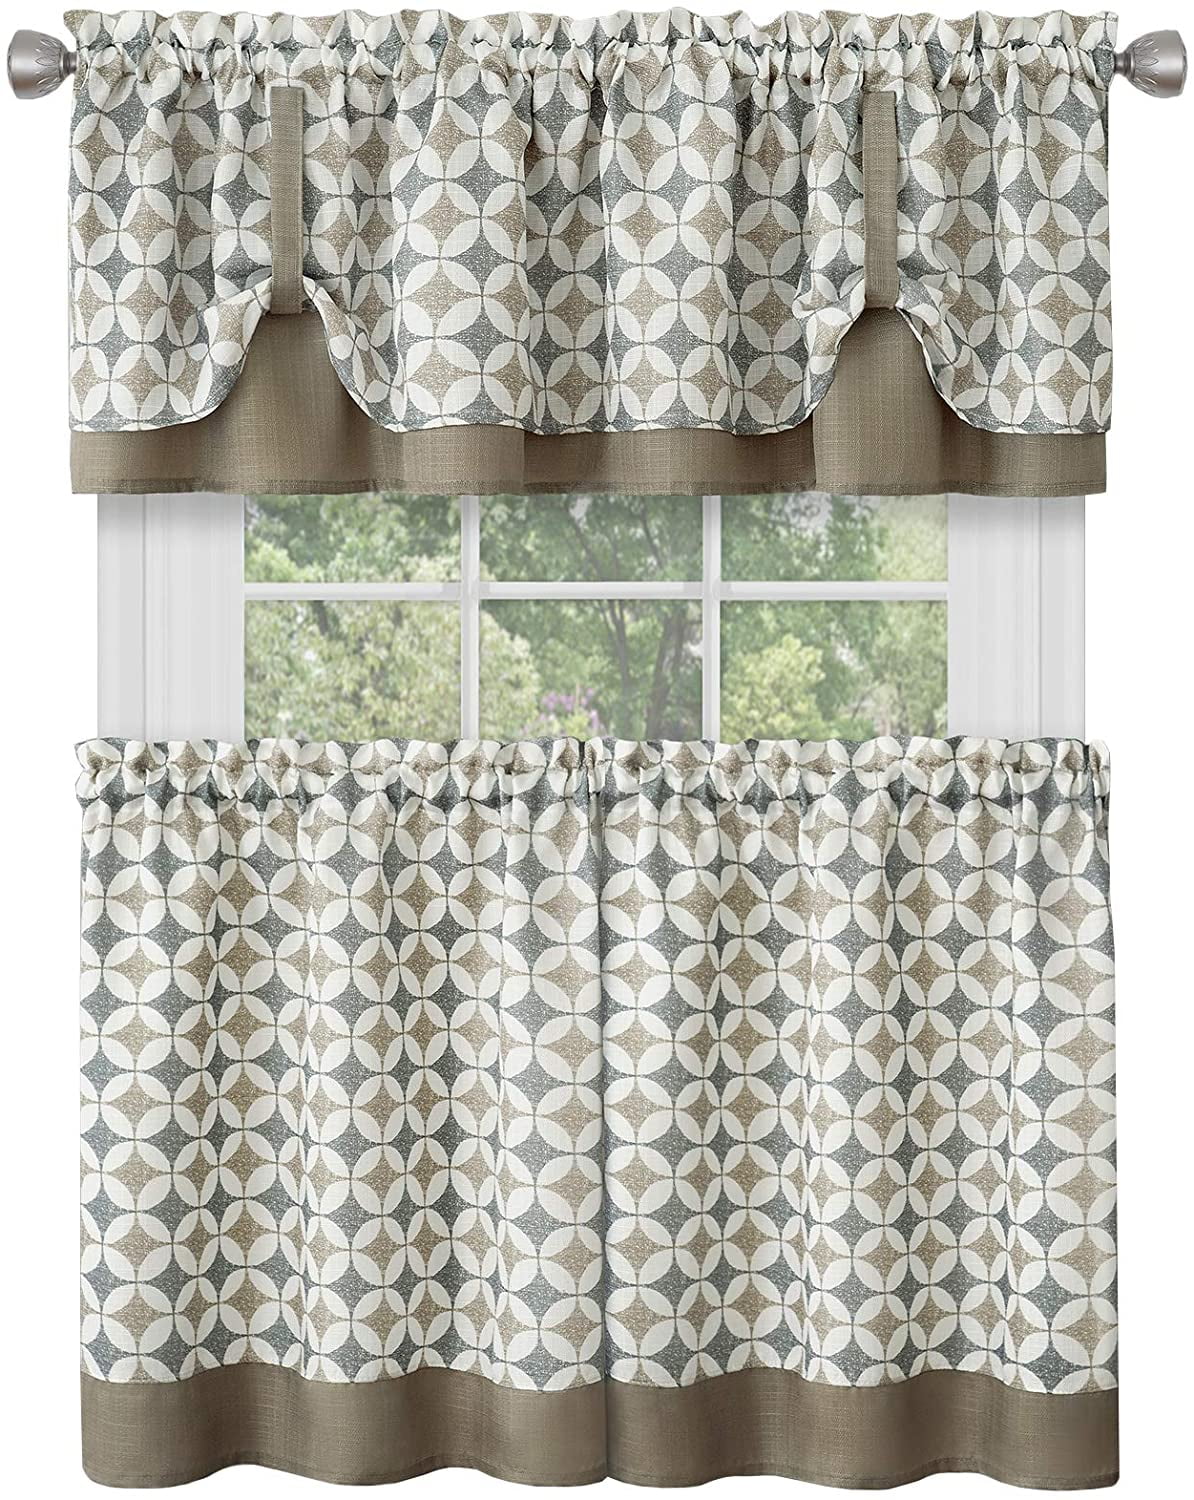 18 Piece Window Kitchen Curtain Set with Double Layer Plaid Gingham Fabric,  Tier Pair Panels and Cuff Tab Top Valance, Farmhouse Decor, Olive, 186